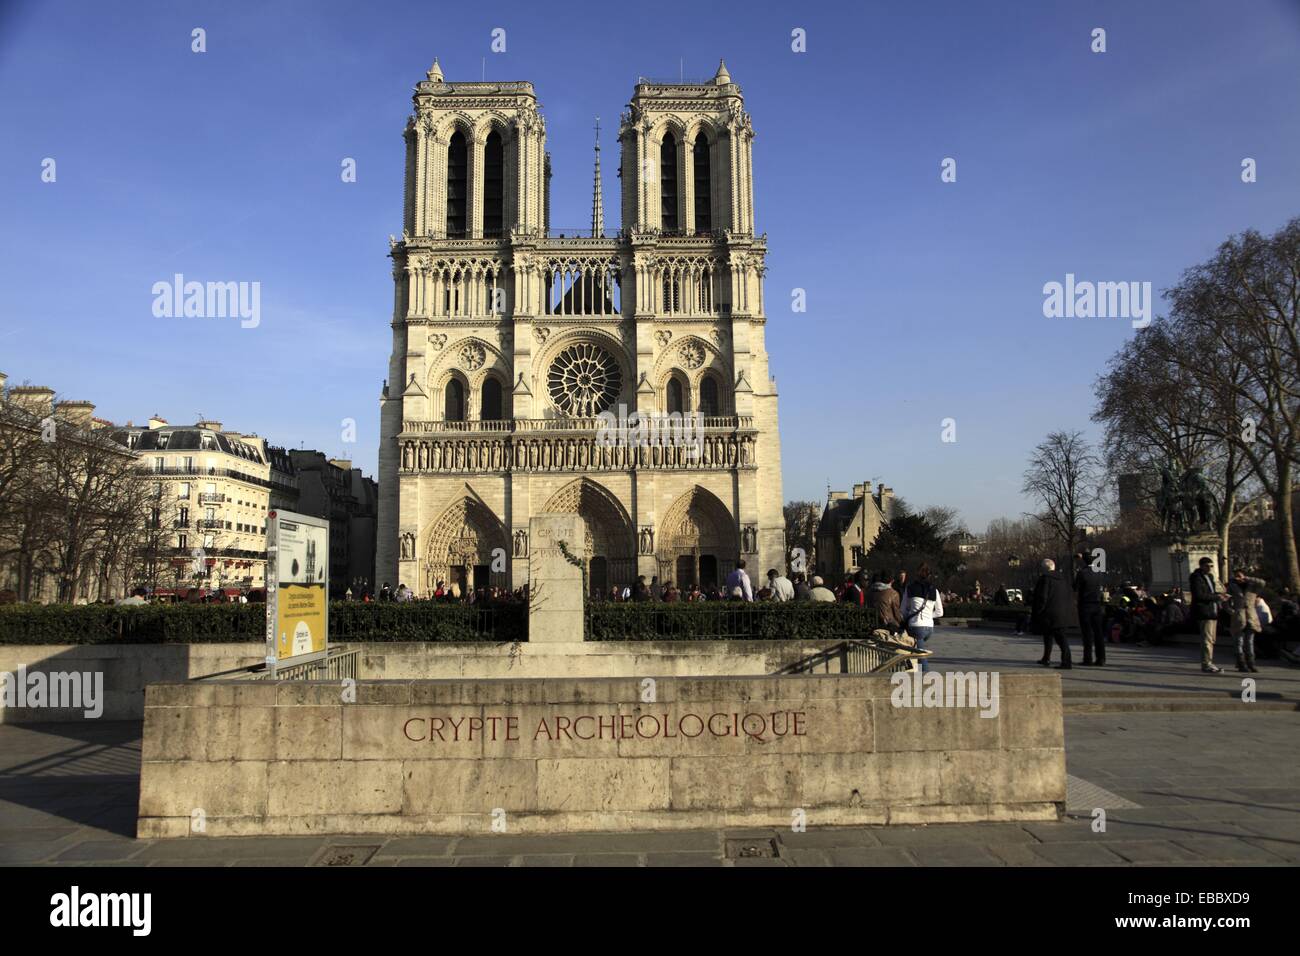 The archaeological crypt of Notre Dame with the bell towers of Notre Dame Cathedral in the background  Paris  France. Stock Photo